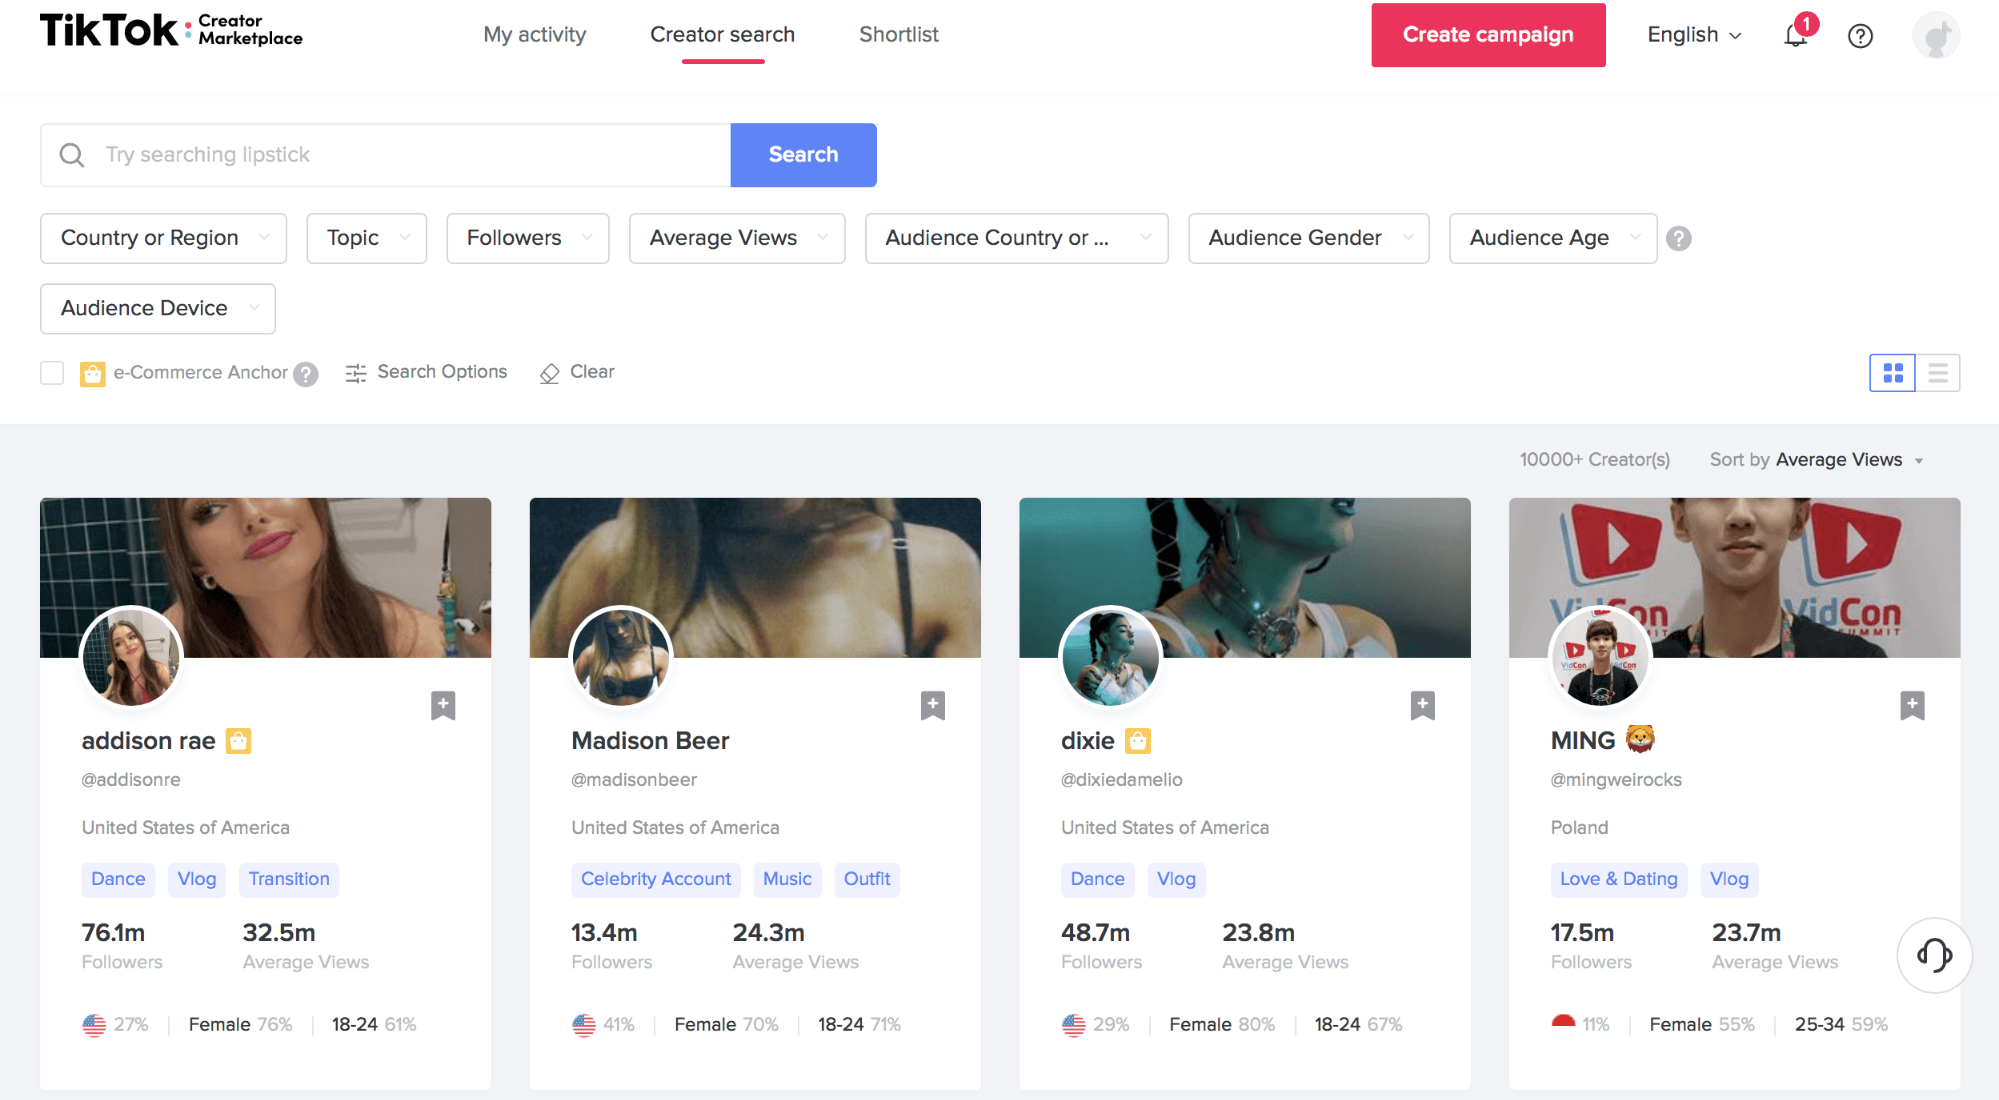 TikTok Marketplace Research and Outreach